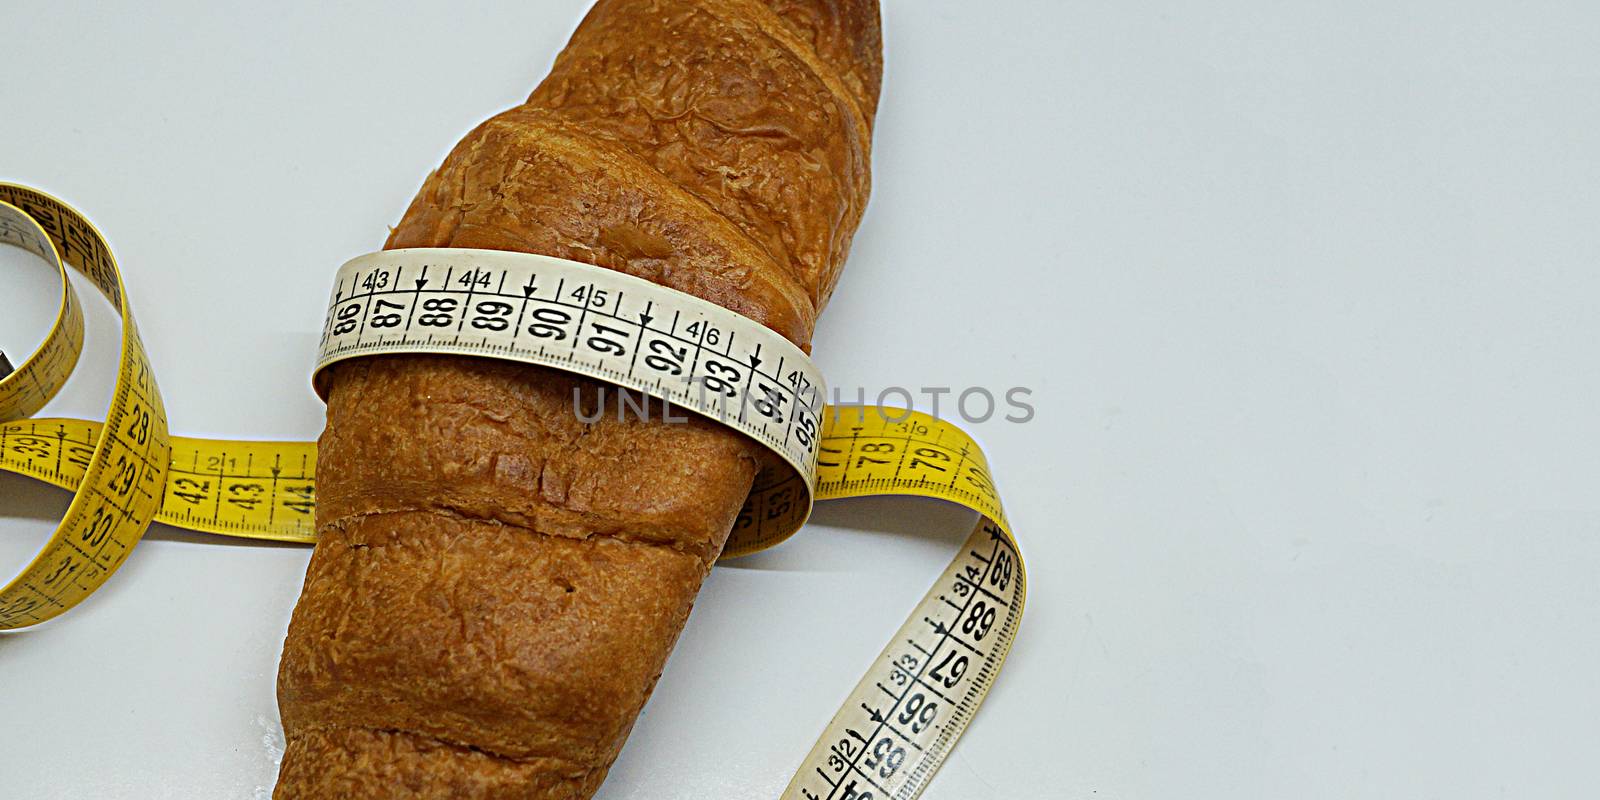 soft measuring ruler wrapped around a croissant as a symbol of unhealthy nutrition by Annado